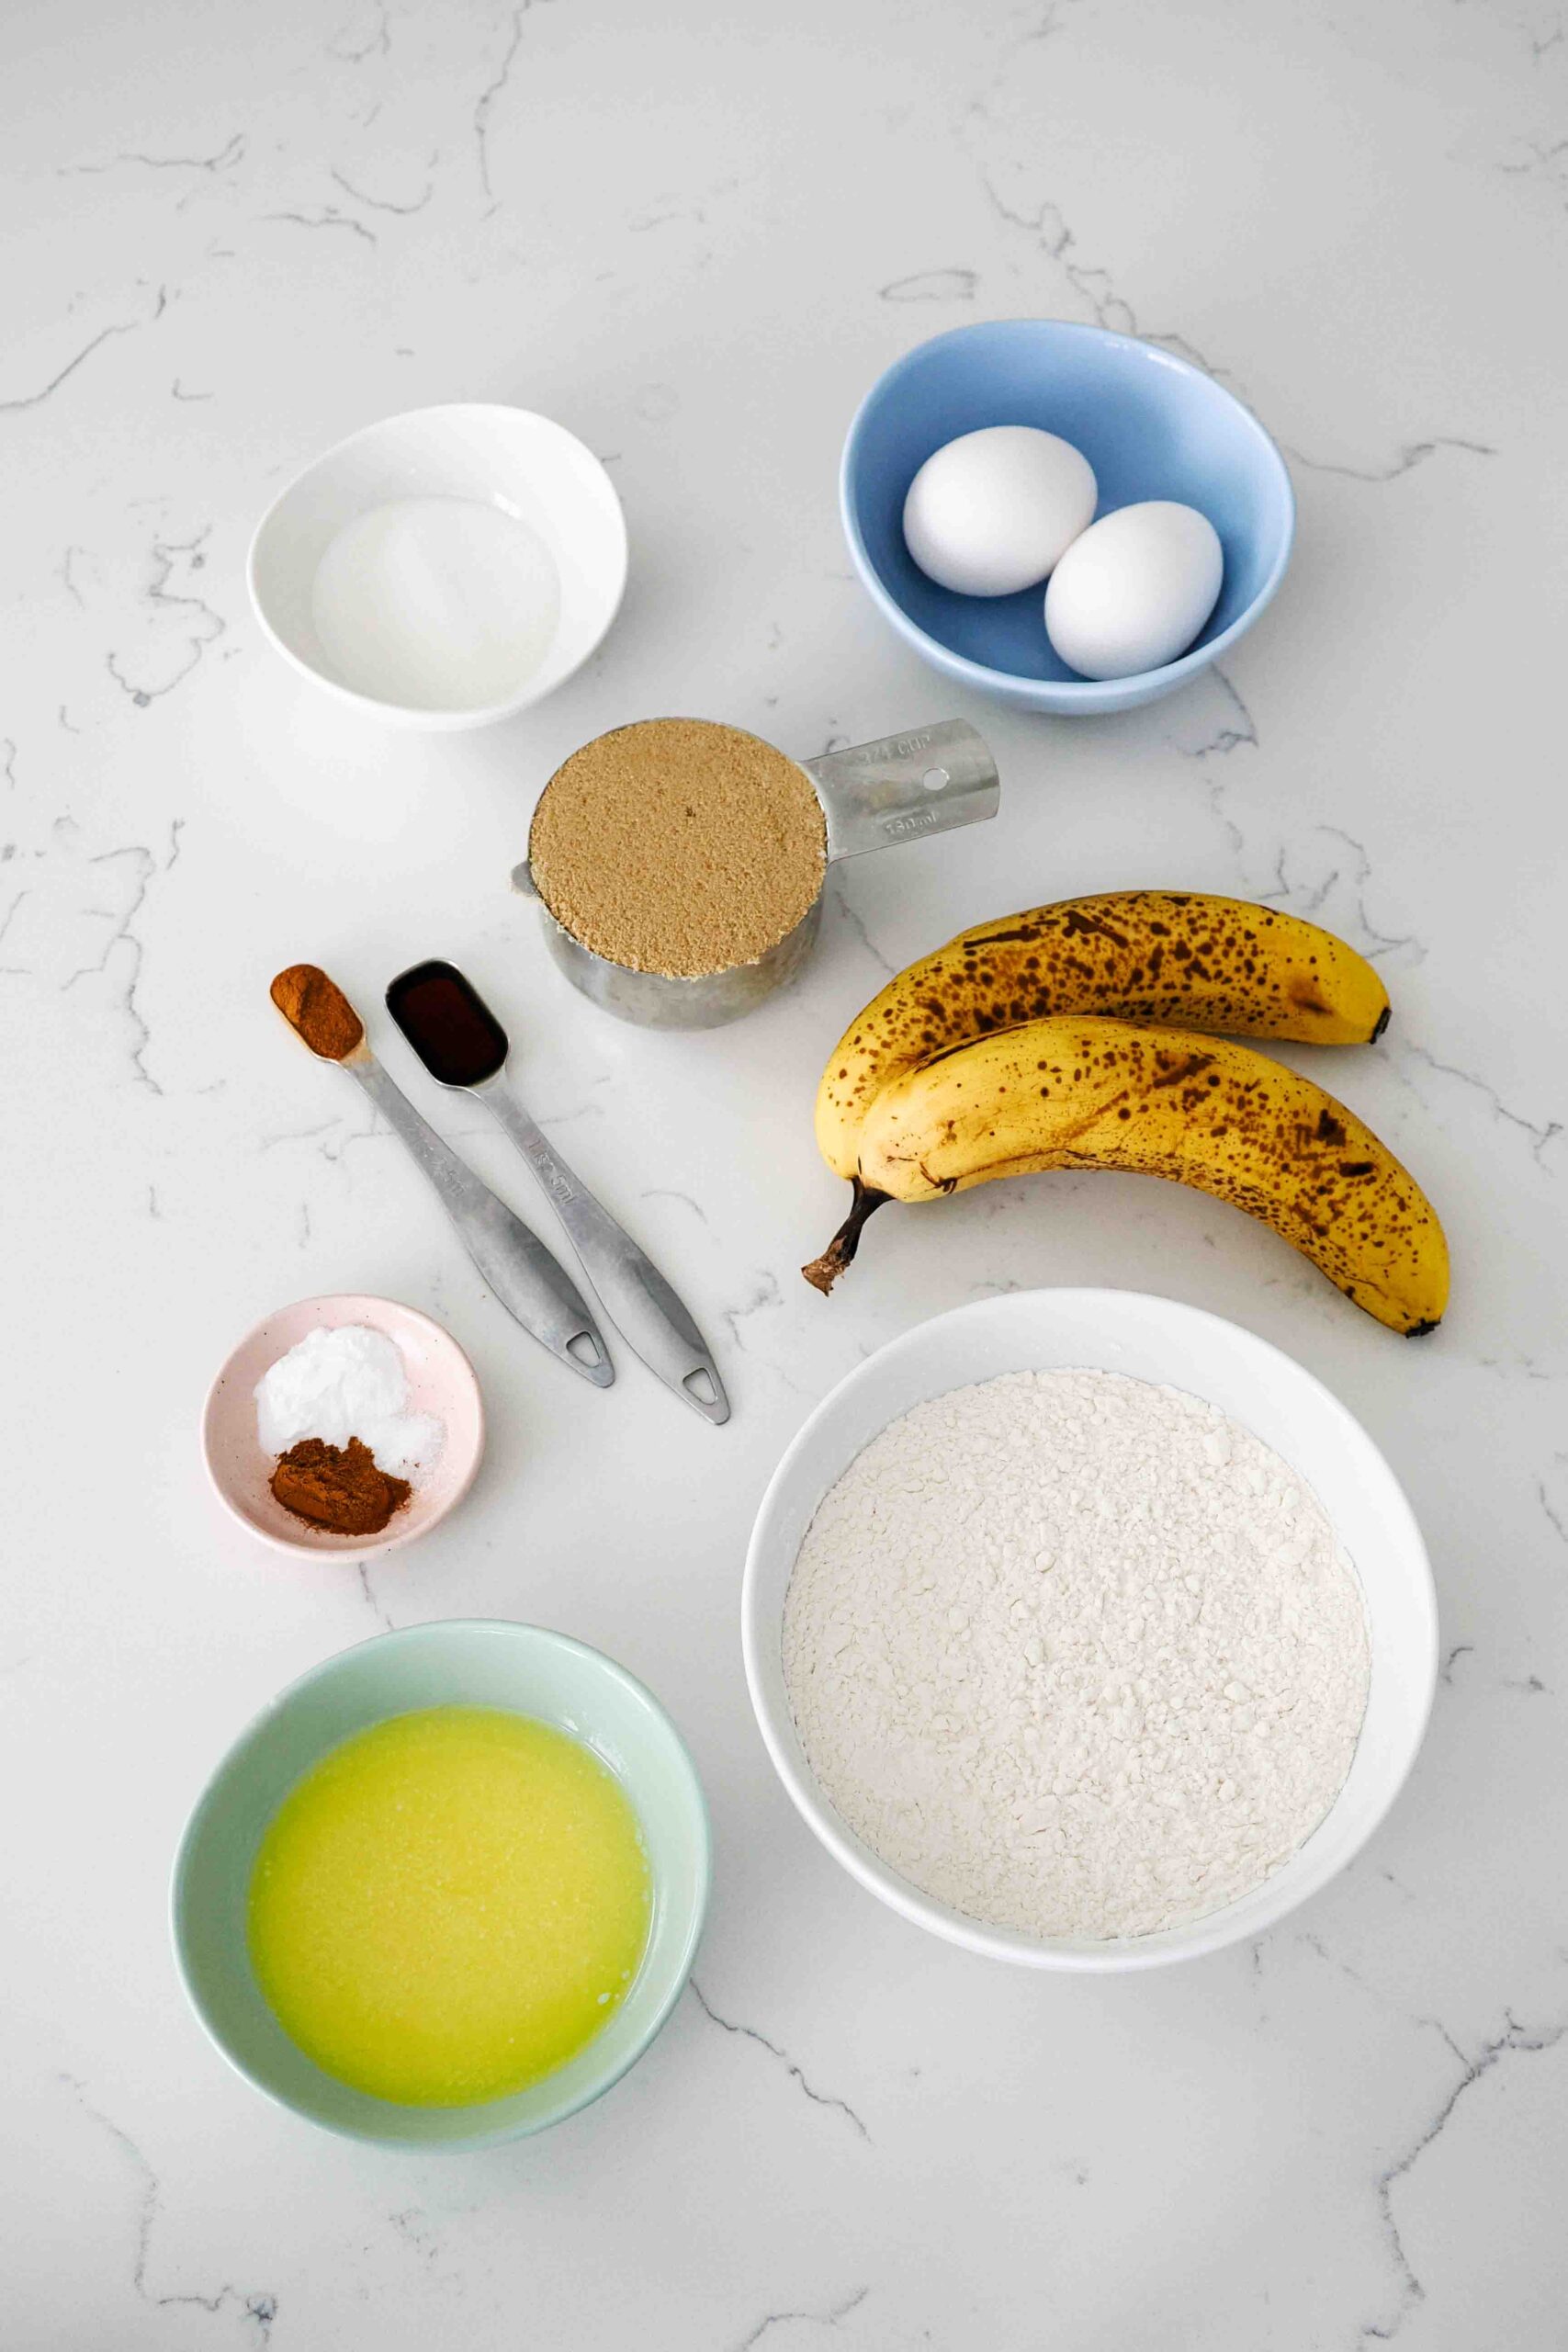 Ingredients for banana bread on a quartz counter.